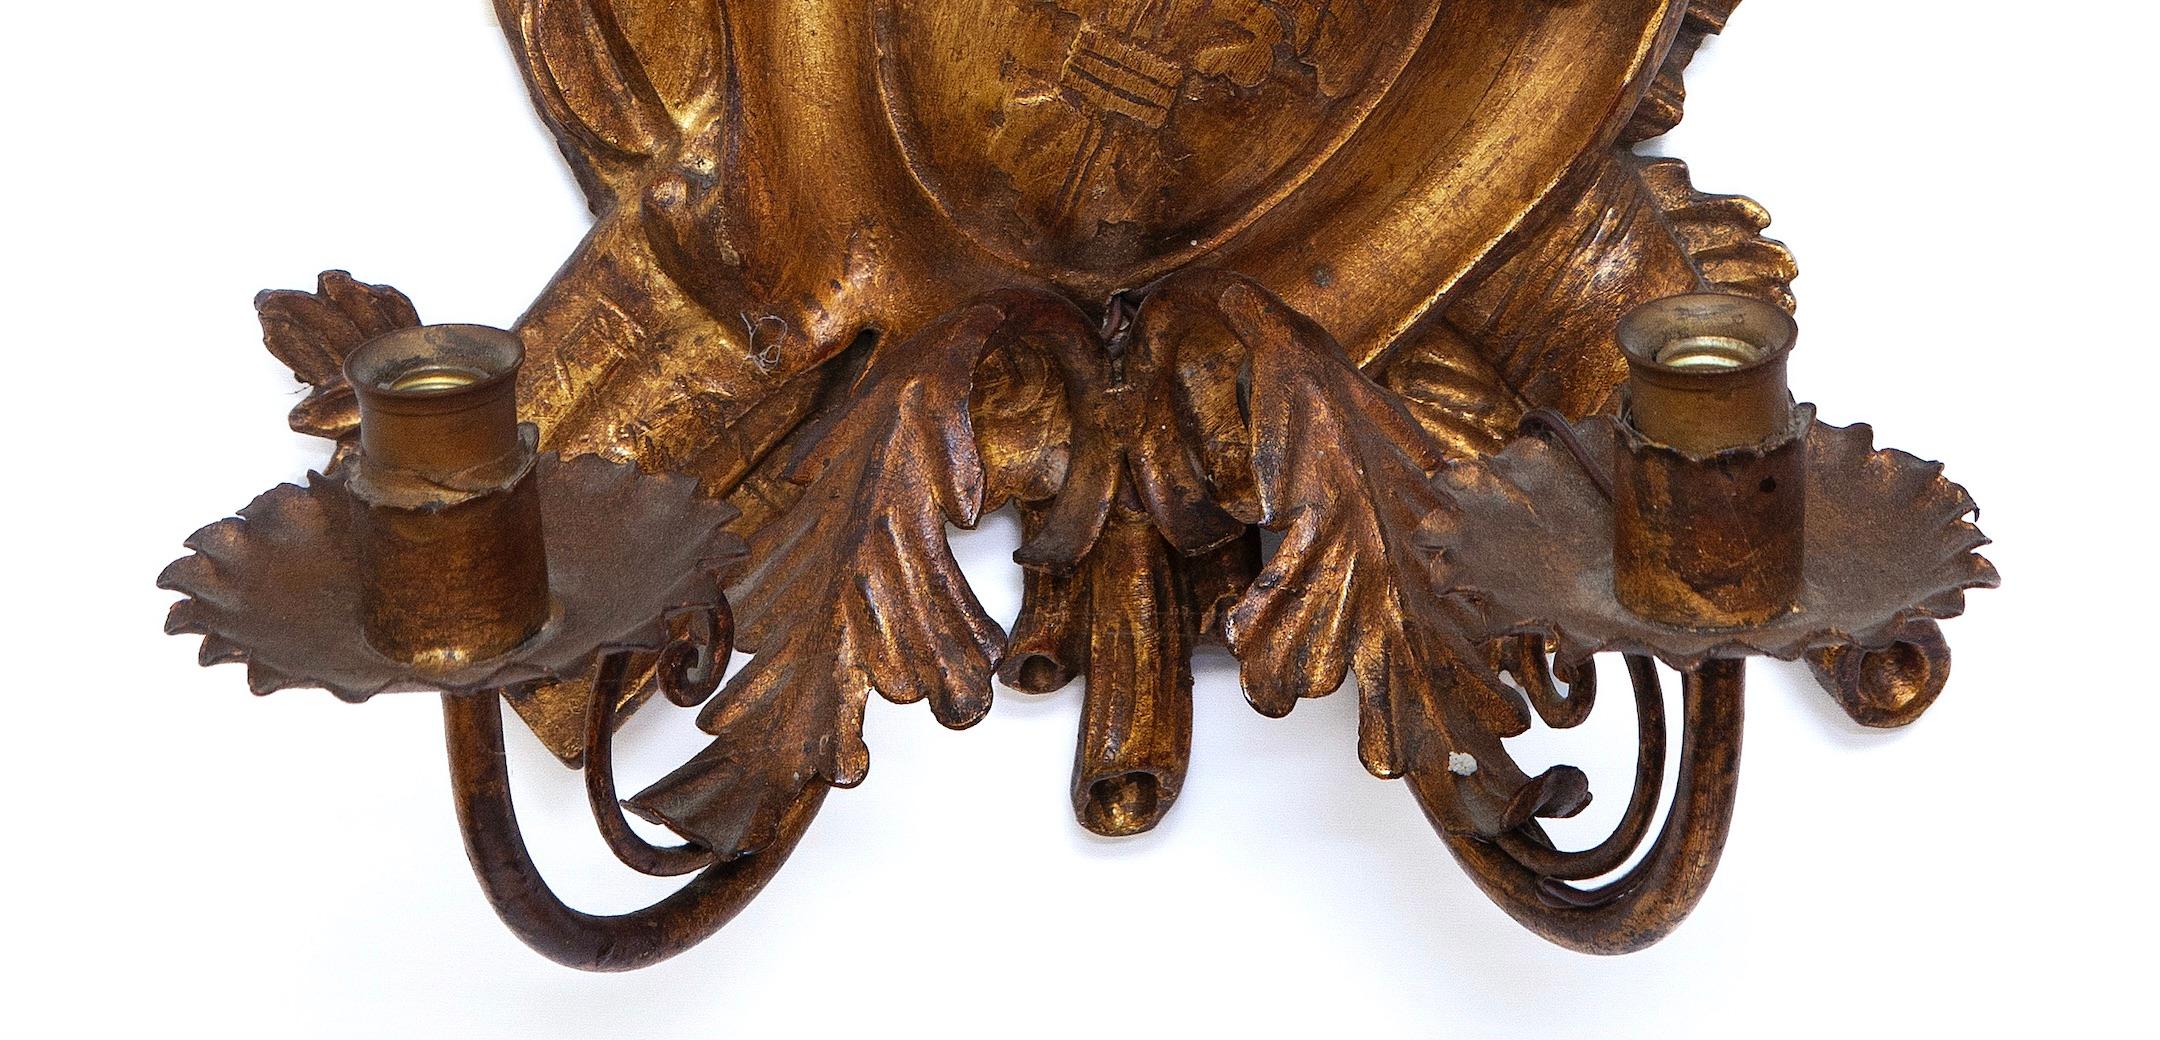 Late Victorian Wall Sconce Trophy Carved Gilded 19C Fleur-de-Lys Shield Quivers Herald 17.5